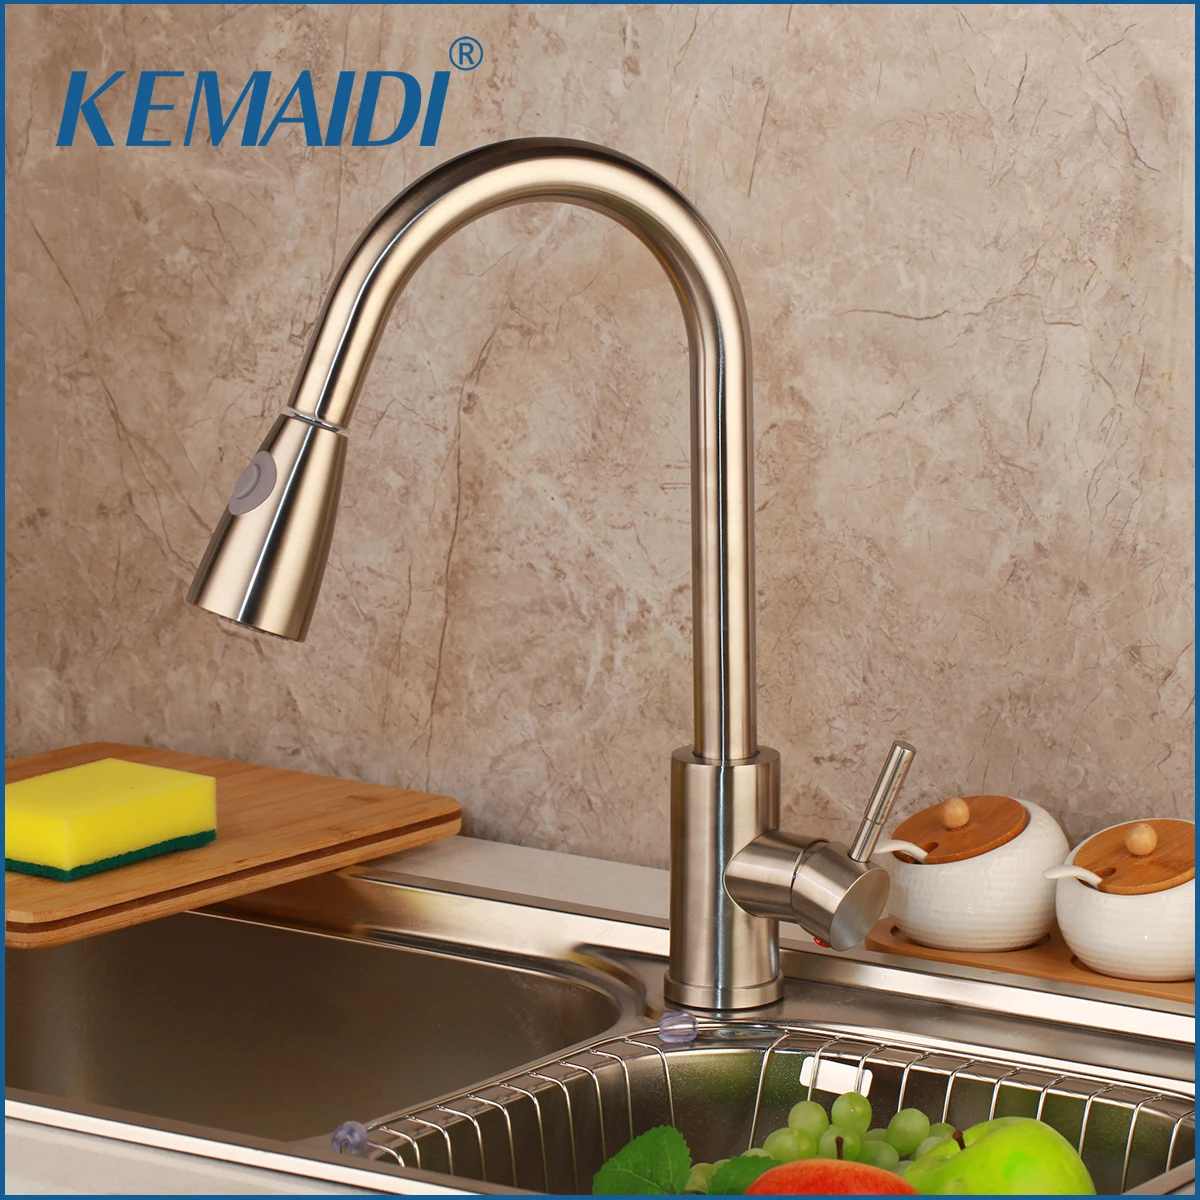 

KEMAIDI Nickel Brushed Solid Brass Kitchen Faucet Single Handle Water Mixer Tap Deck Mounted Torneira Cozinha Pull Out Spray